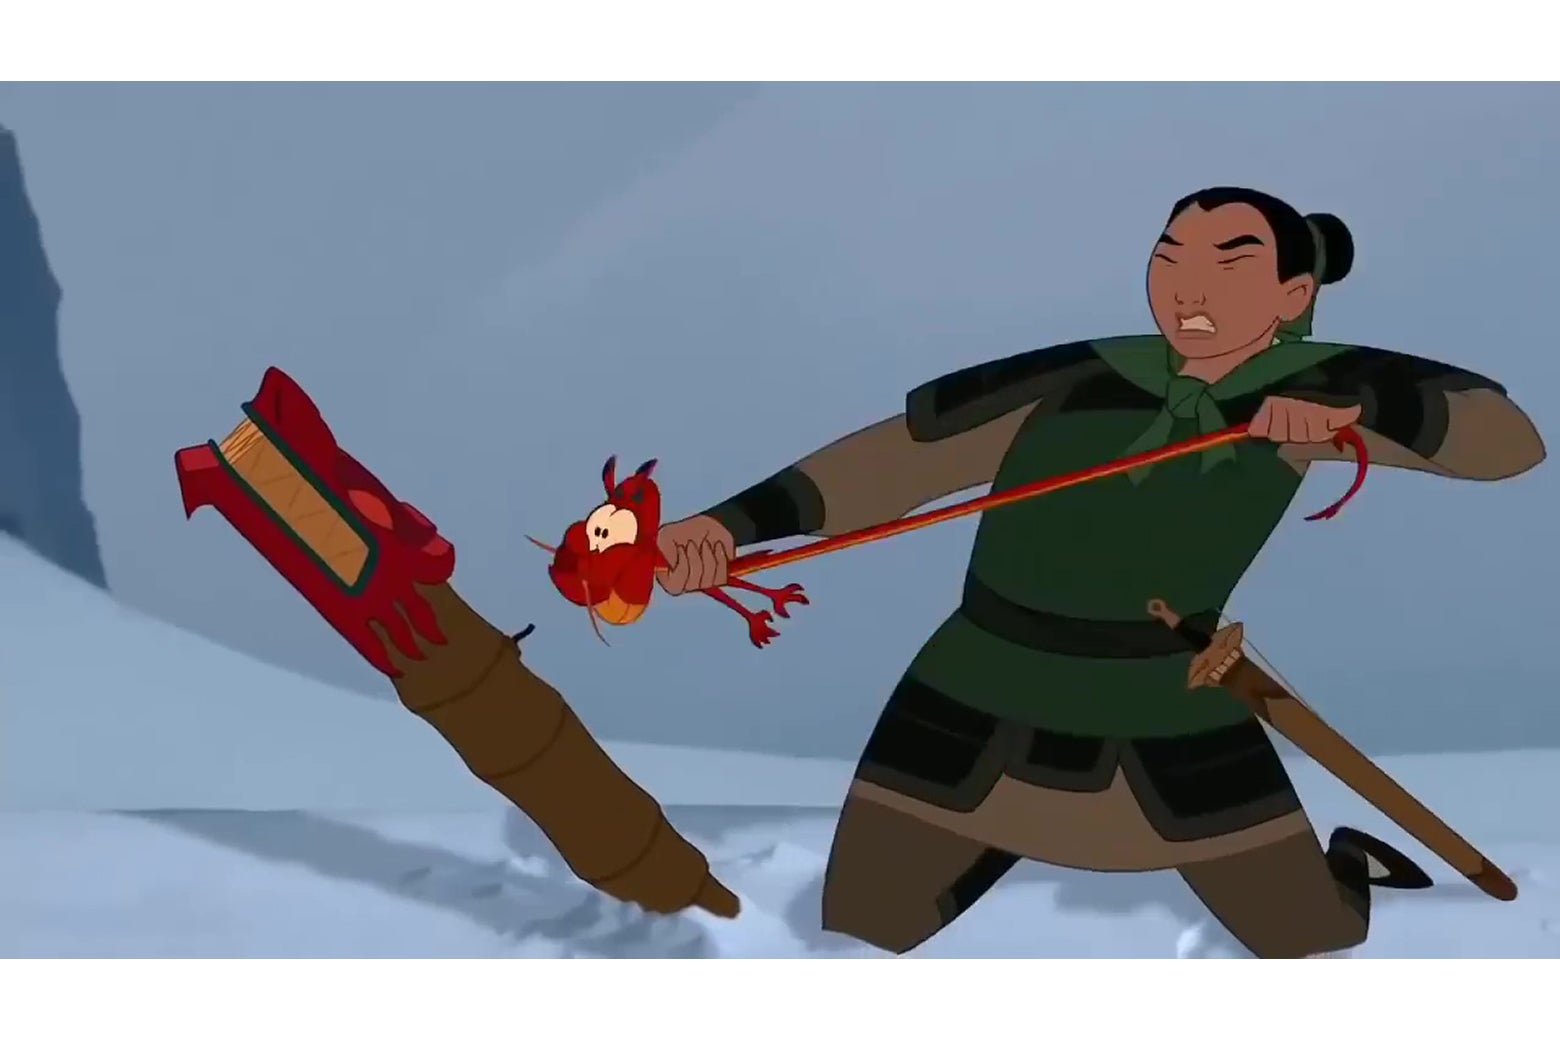 Mulan pulls her dragon's tail to make it shoot fire; the dragon's entire body twists and distorts in response.